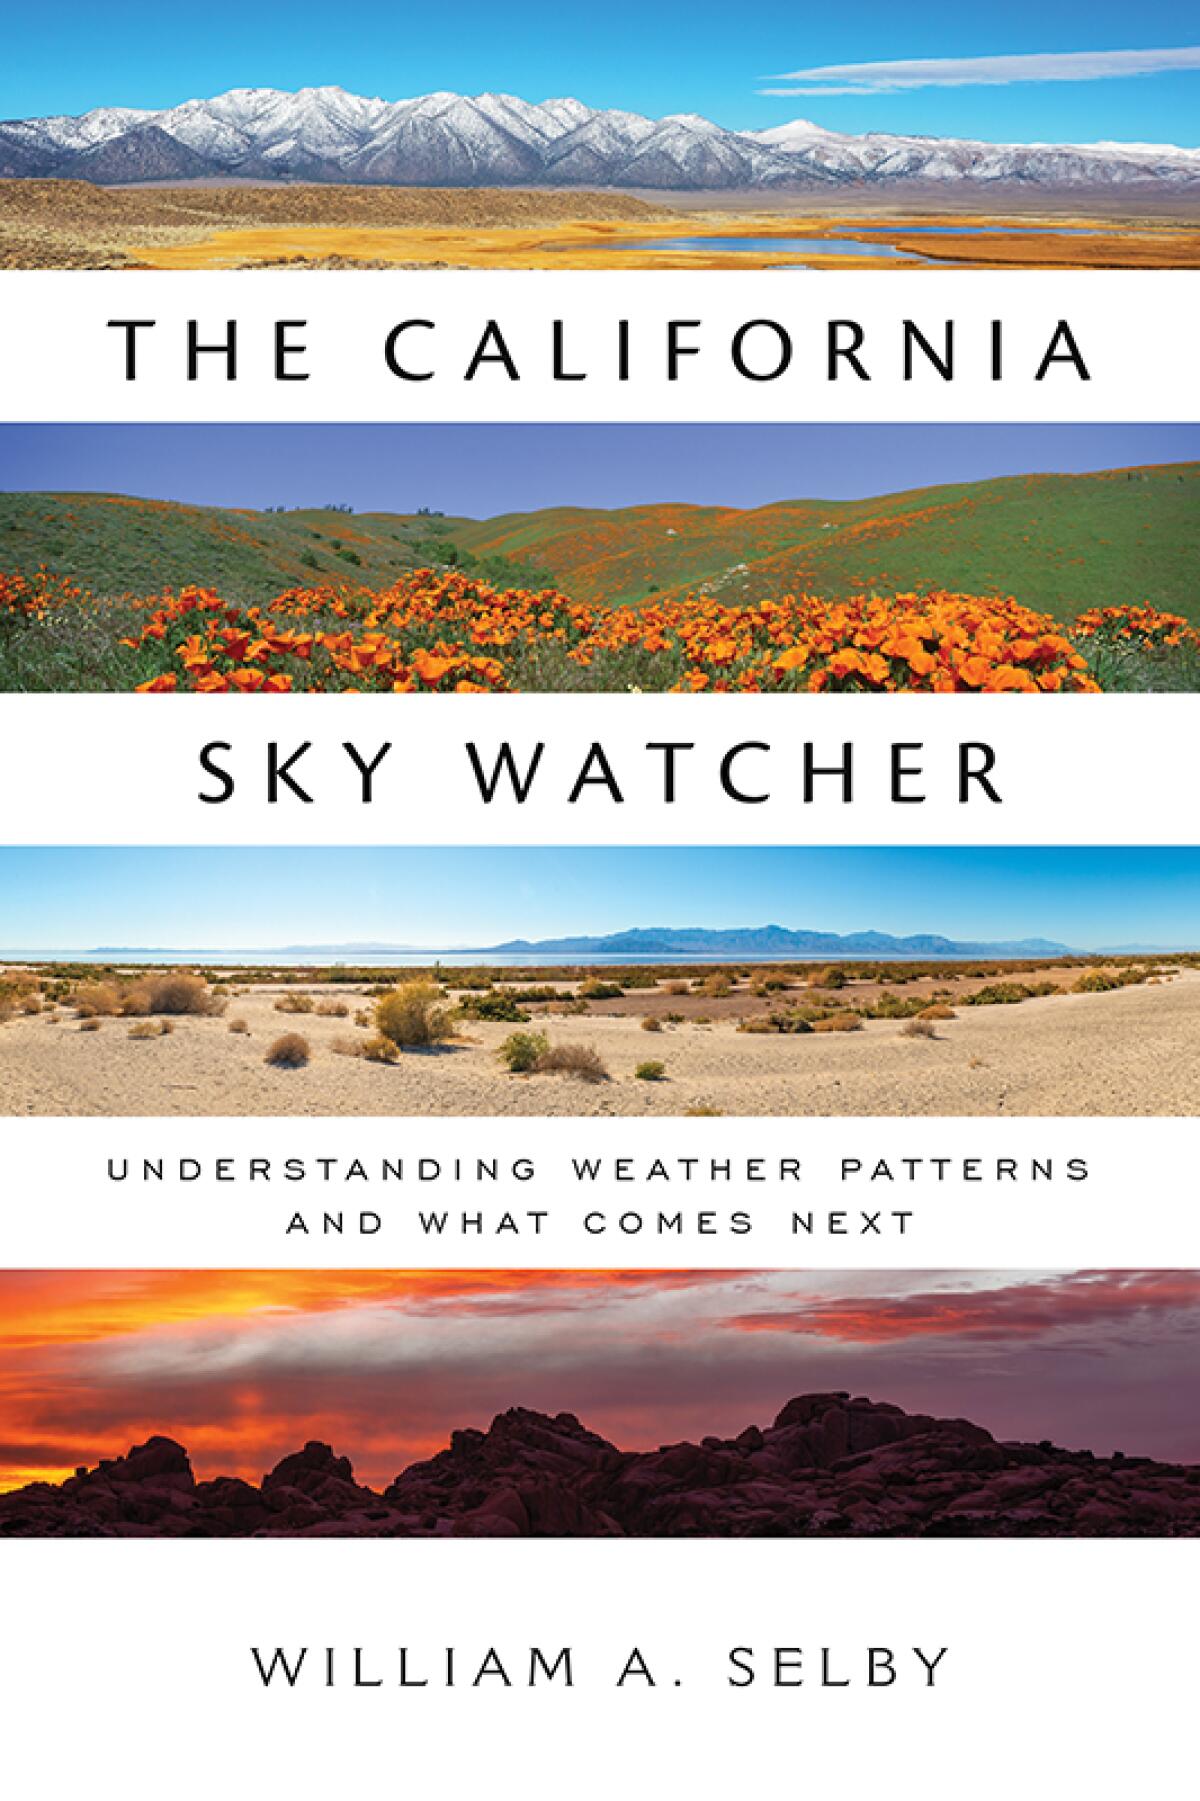 "The California Sky Watcher" cover